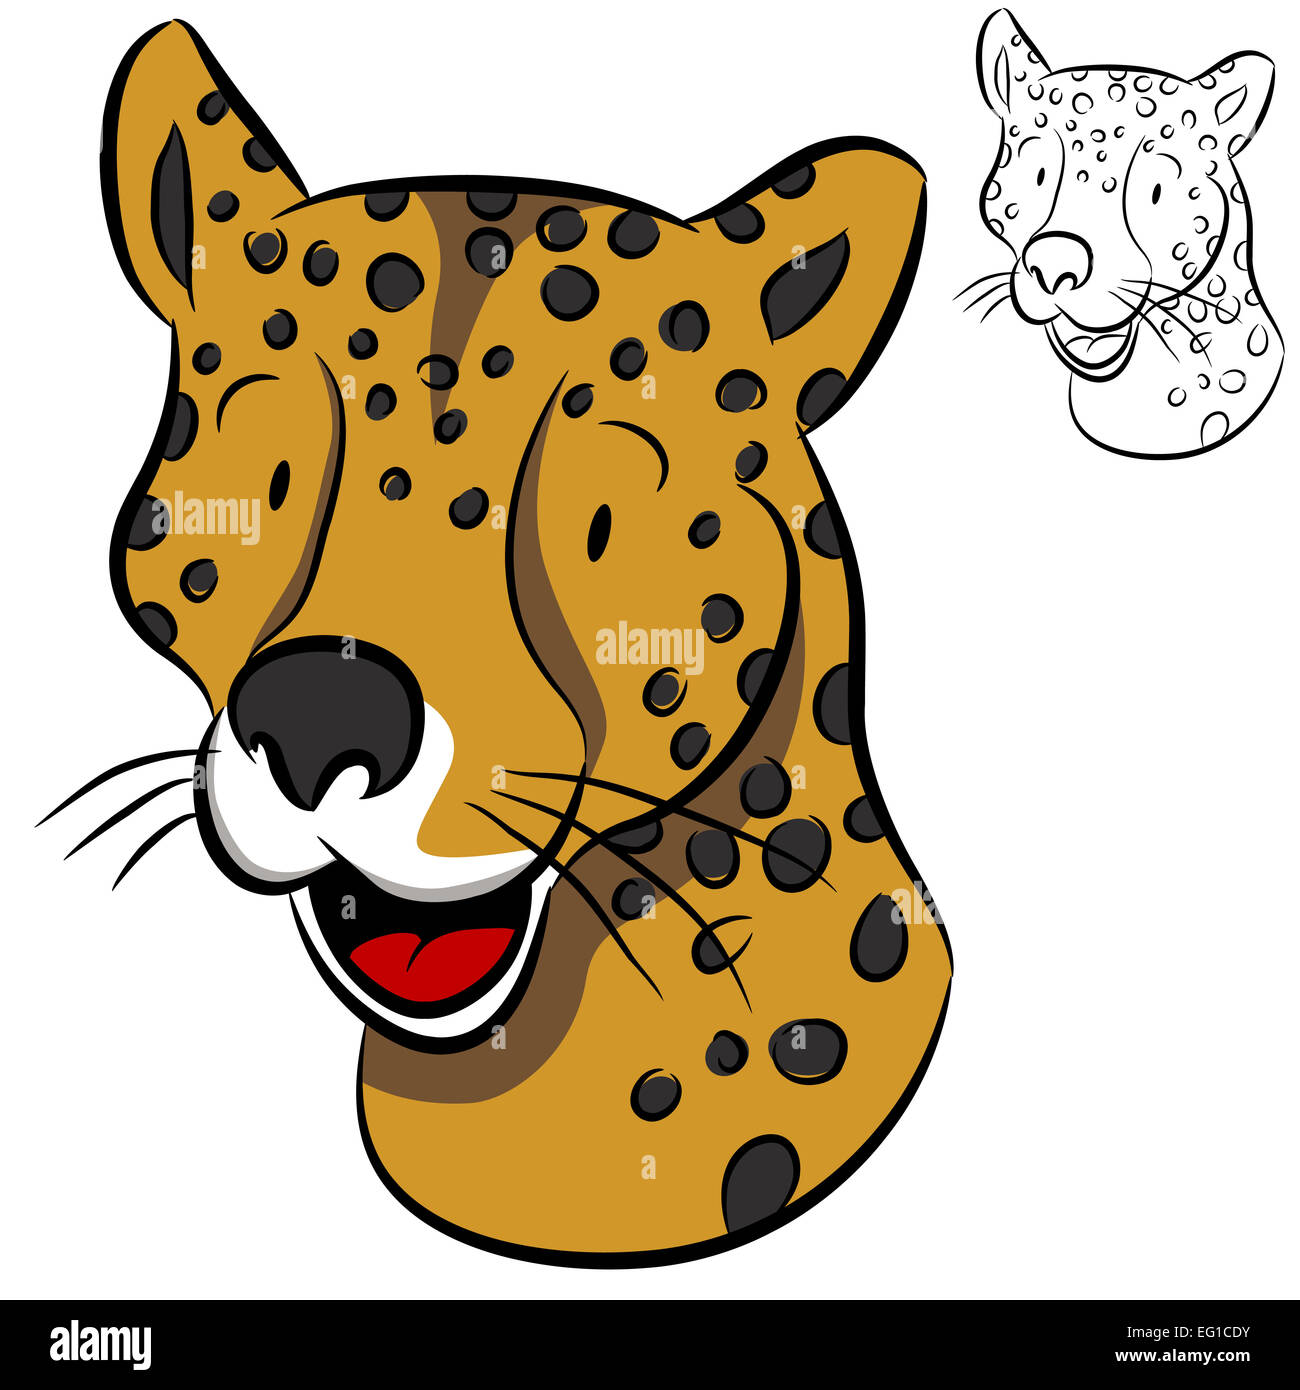 Cheetah smiling Cut Out Stock Images & Pictures - Alamy